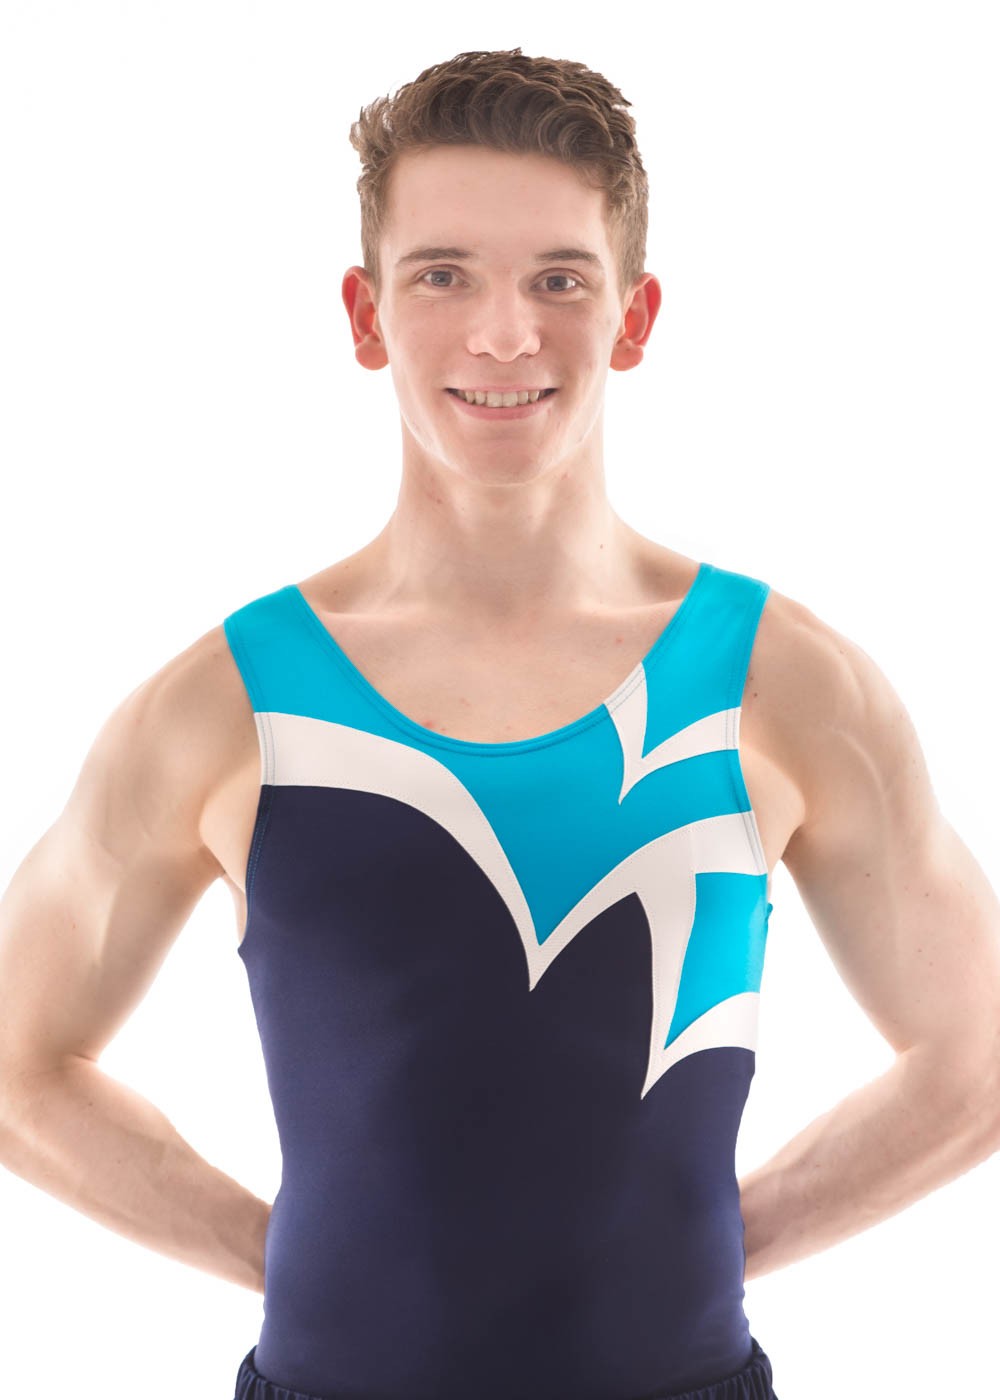 LOGAN BVZ12: - Mens sleeveless leotard in Navy White and Turquoise - A ...